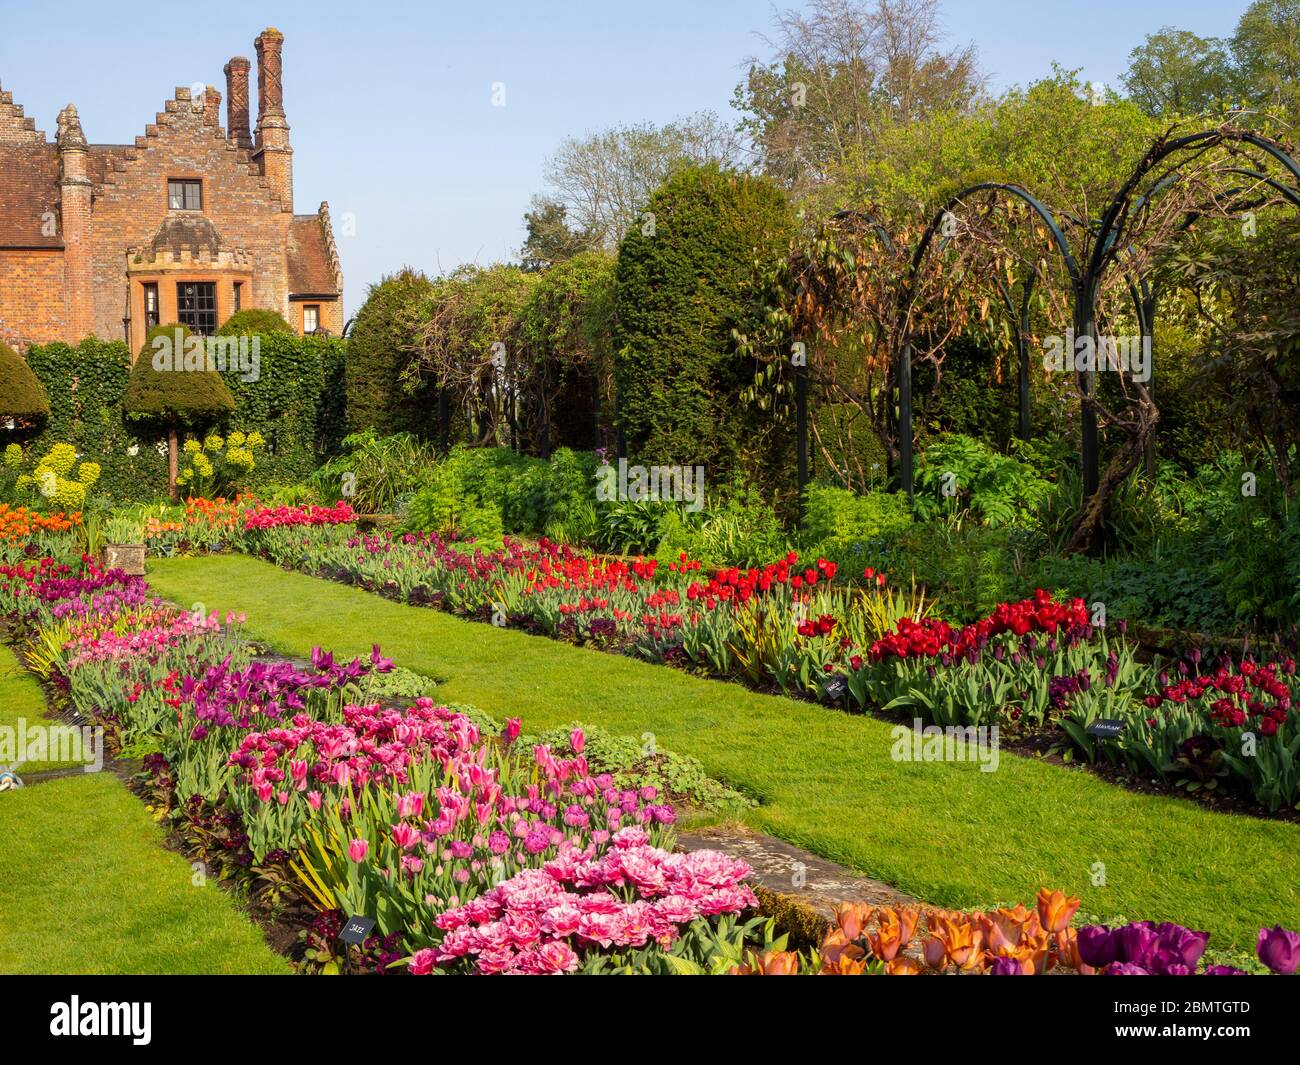 Mass planted tuilps at Chenies Manor sunken Garden. Pinks, reds, mauves and orange blooms,Tudor manor against blue sky. Stock Photo